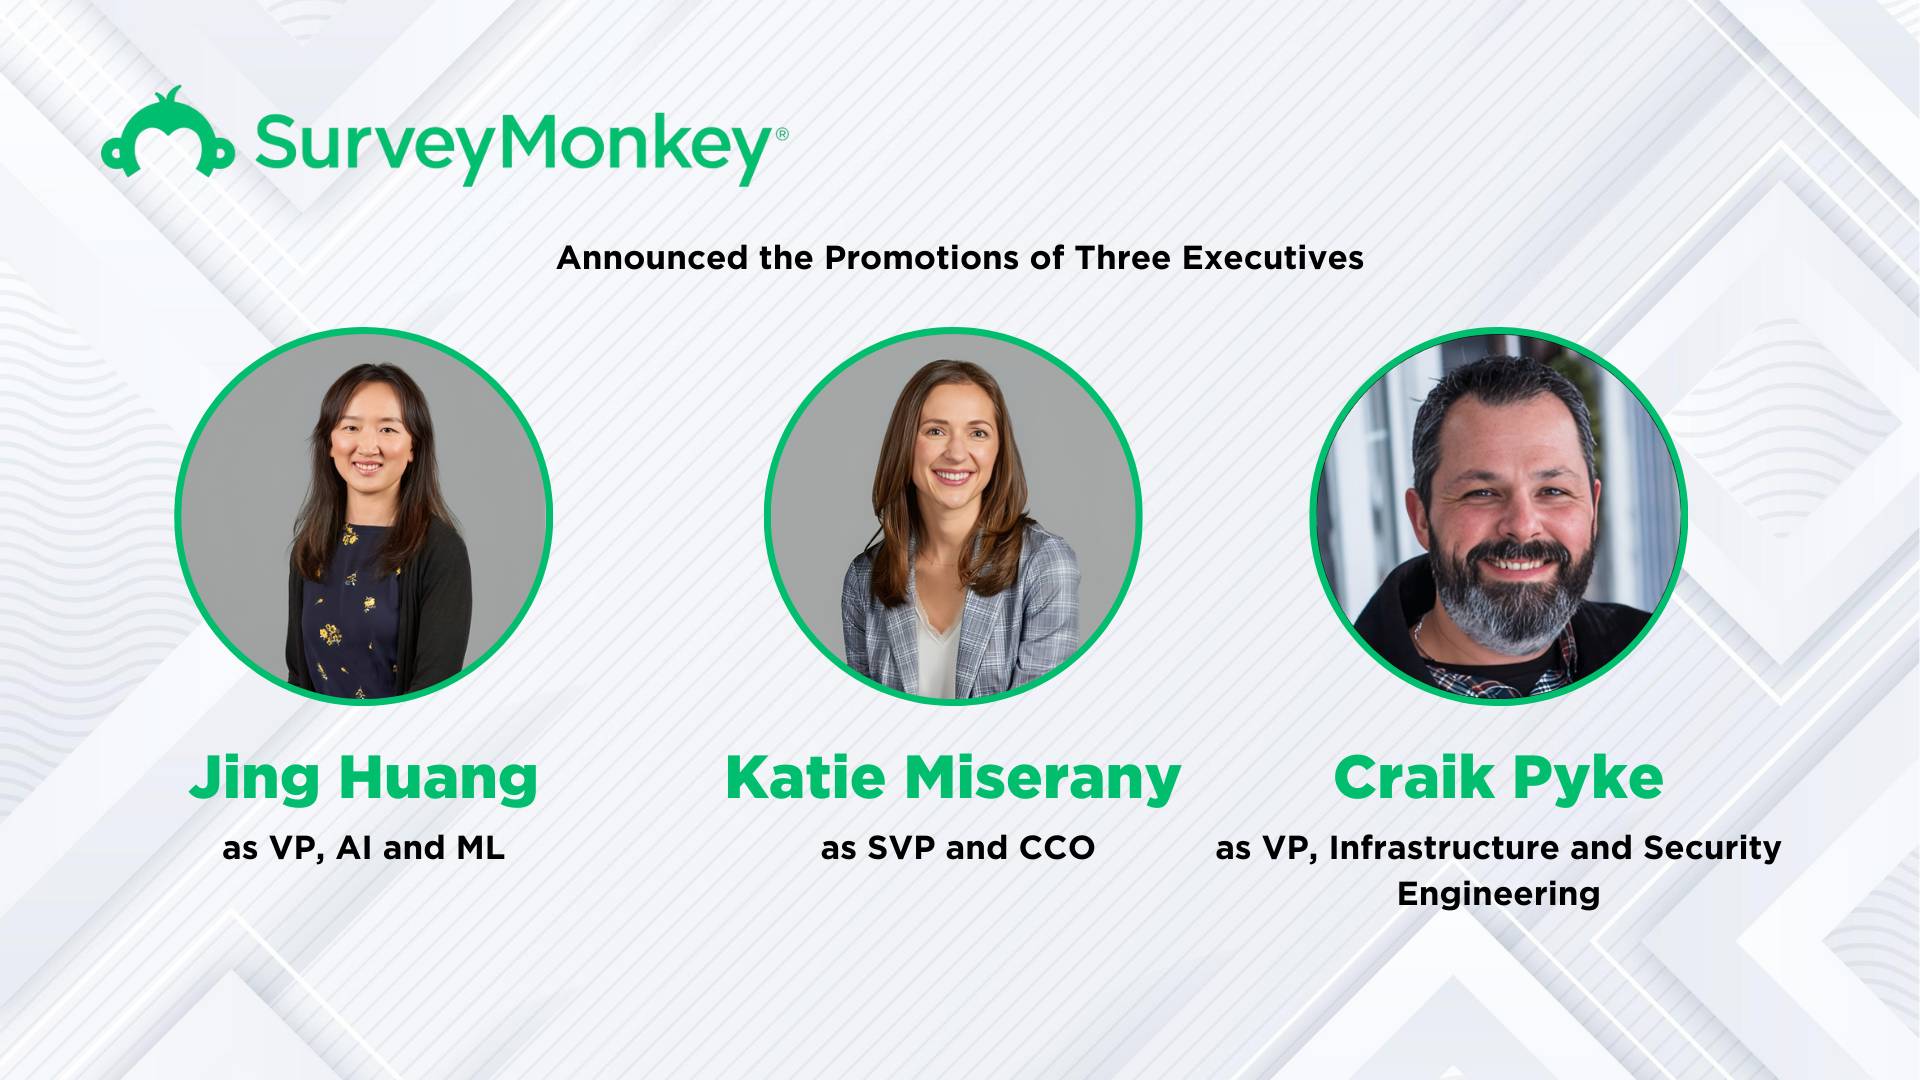 SurveyMonkey Promotes Strategic AI, Communications, and Engineering Leaders as Business Momentum Grows